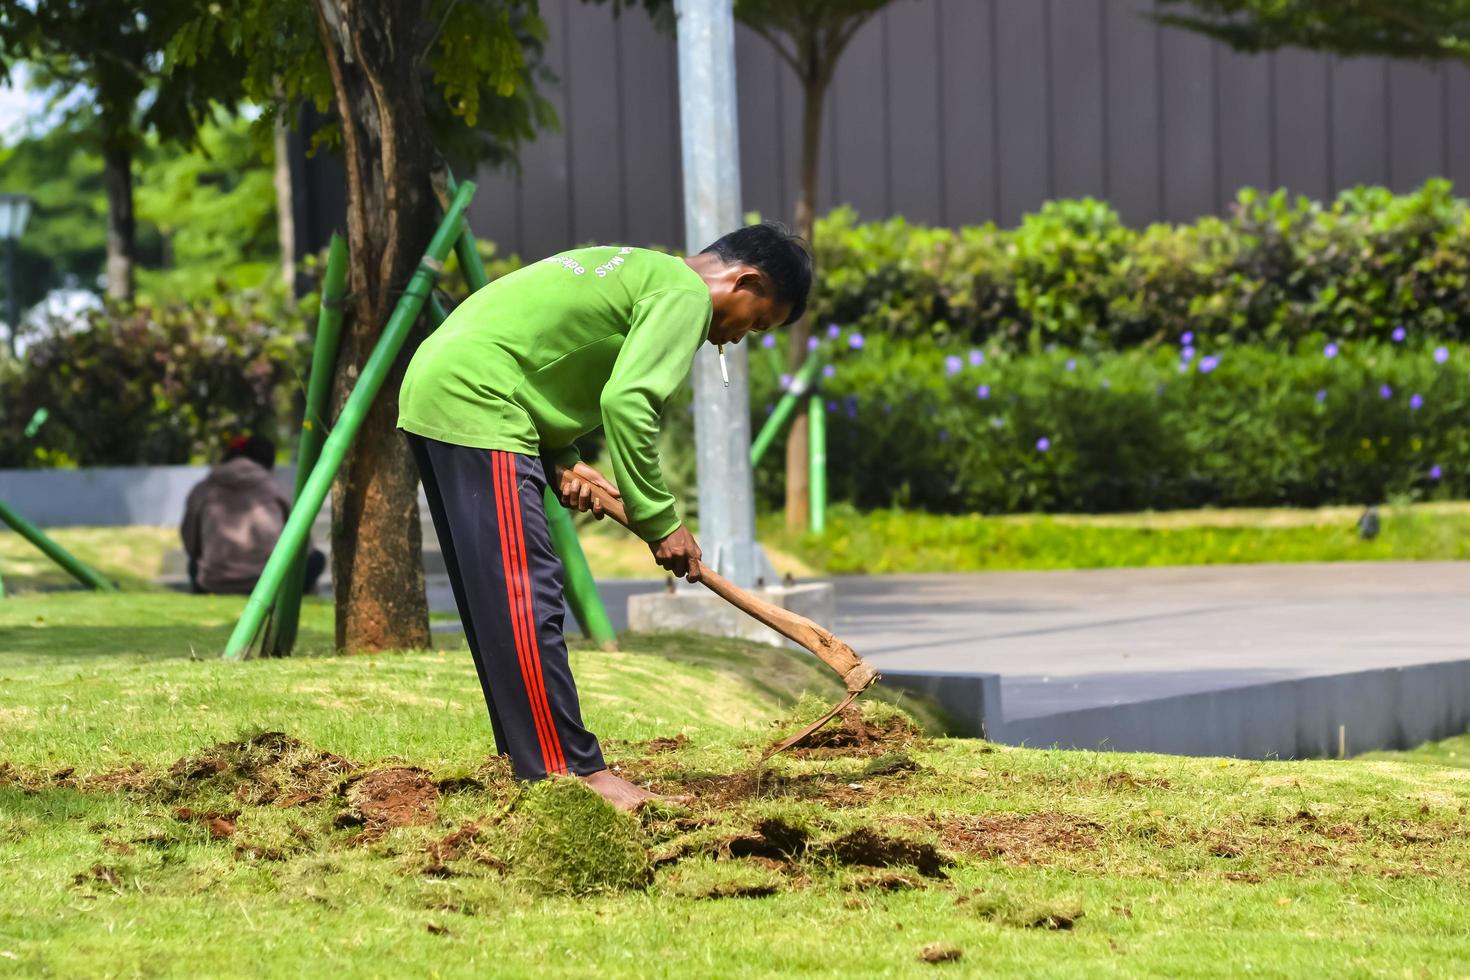 Bekasi, West Java, Indonesia, March 5th 2022. A gardener is hoeing the ground photo